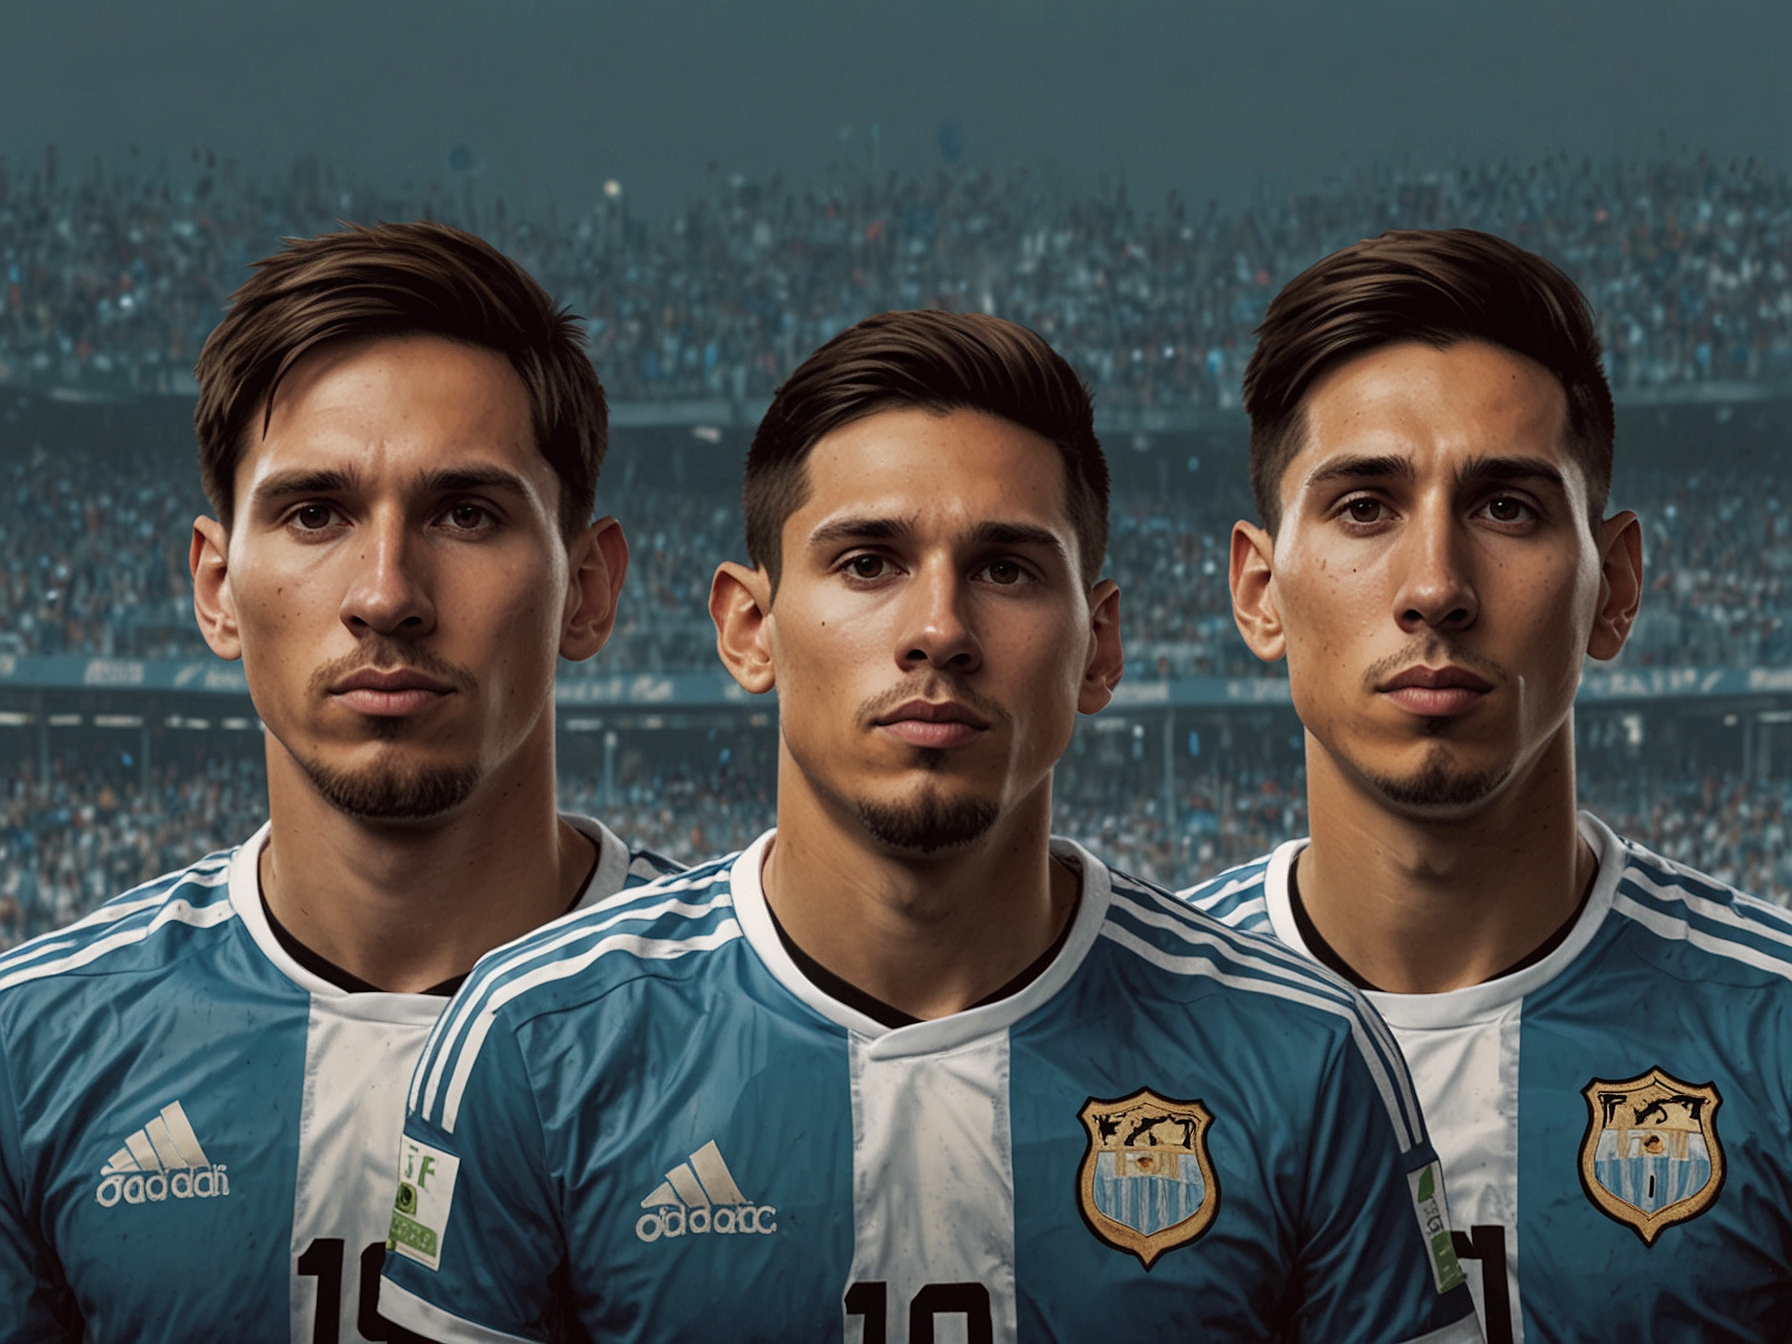 A dynamic group photo of the Argentina national team, featuring key players like Lionel Messi, Paulo Dybala, and Angel Di Maria, underlining their readiness for the upcoming tournament.